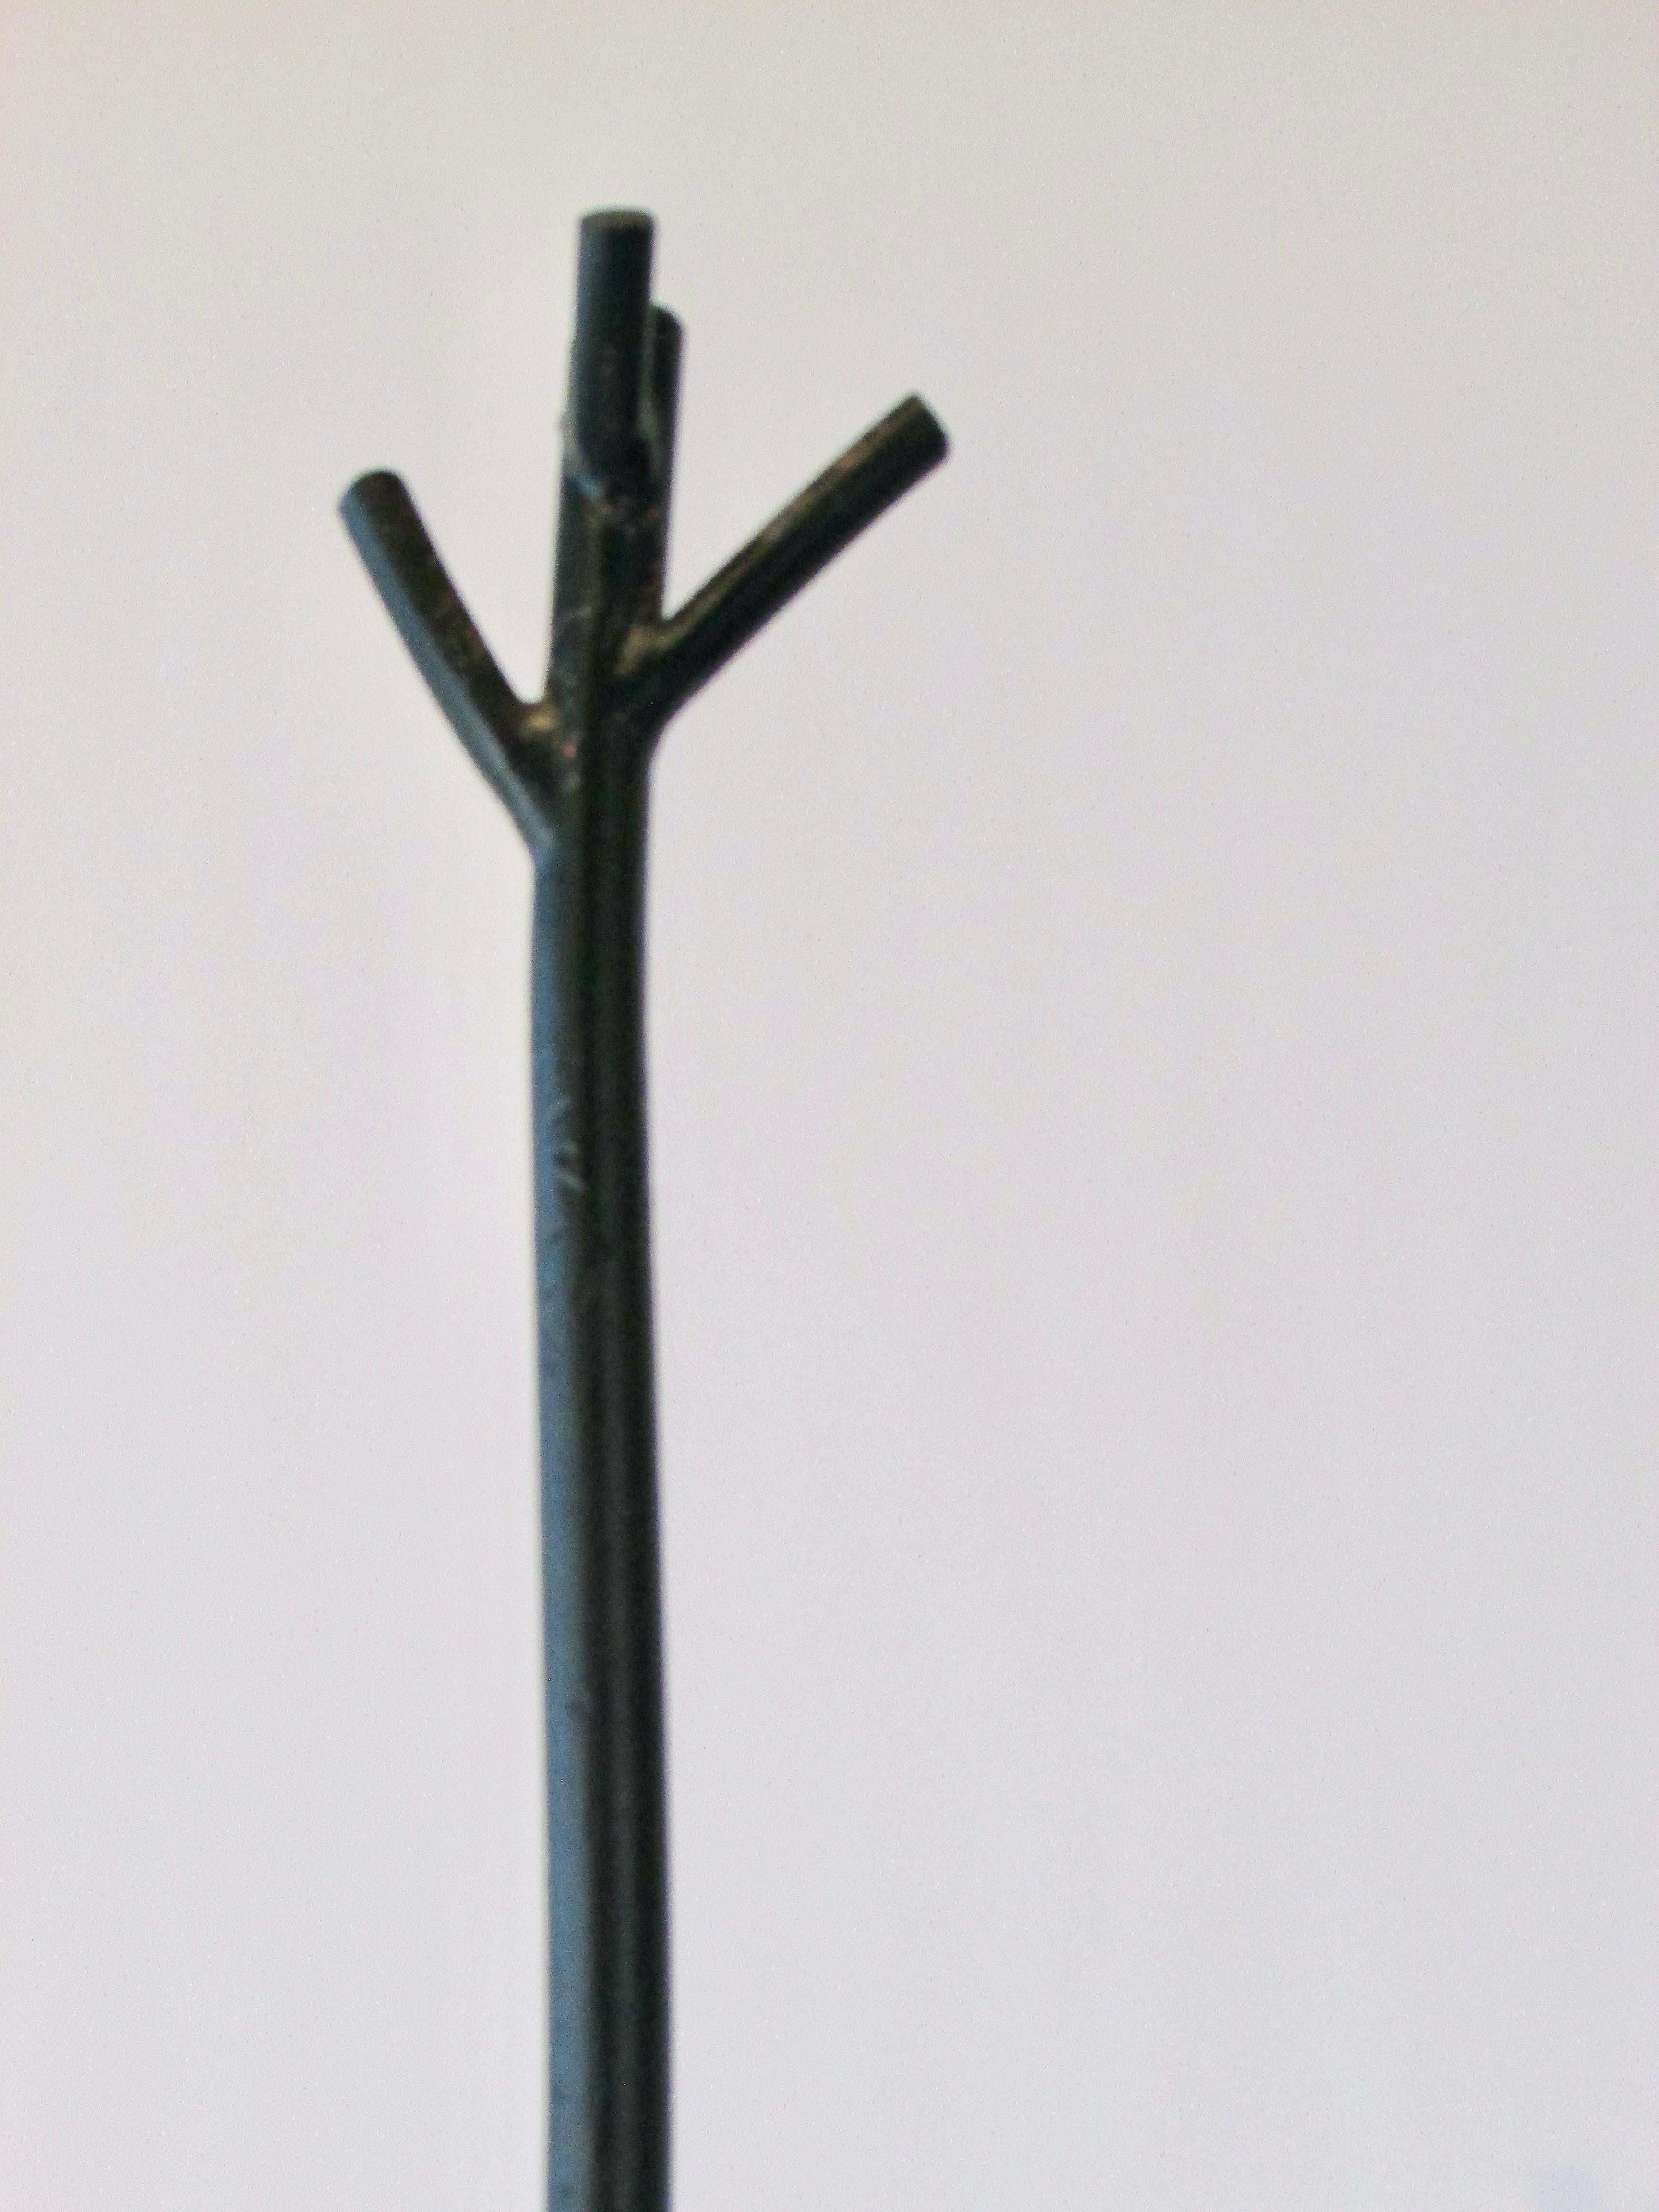 Organic Welded Wrought Iron Tree Branch Sculptural Hat or Coat Rack In Good Condition For Sale In Ferndale, MI